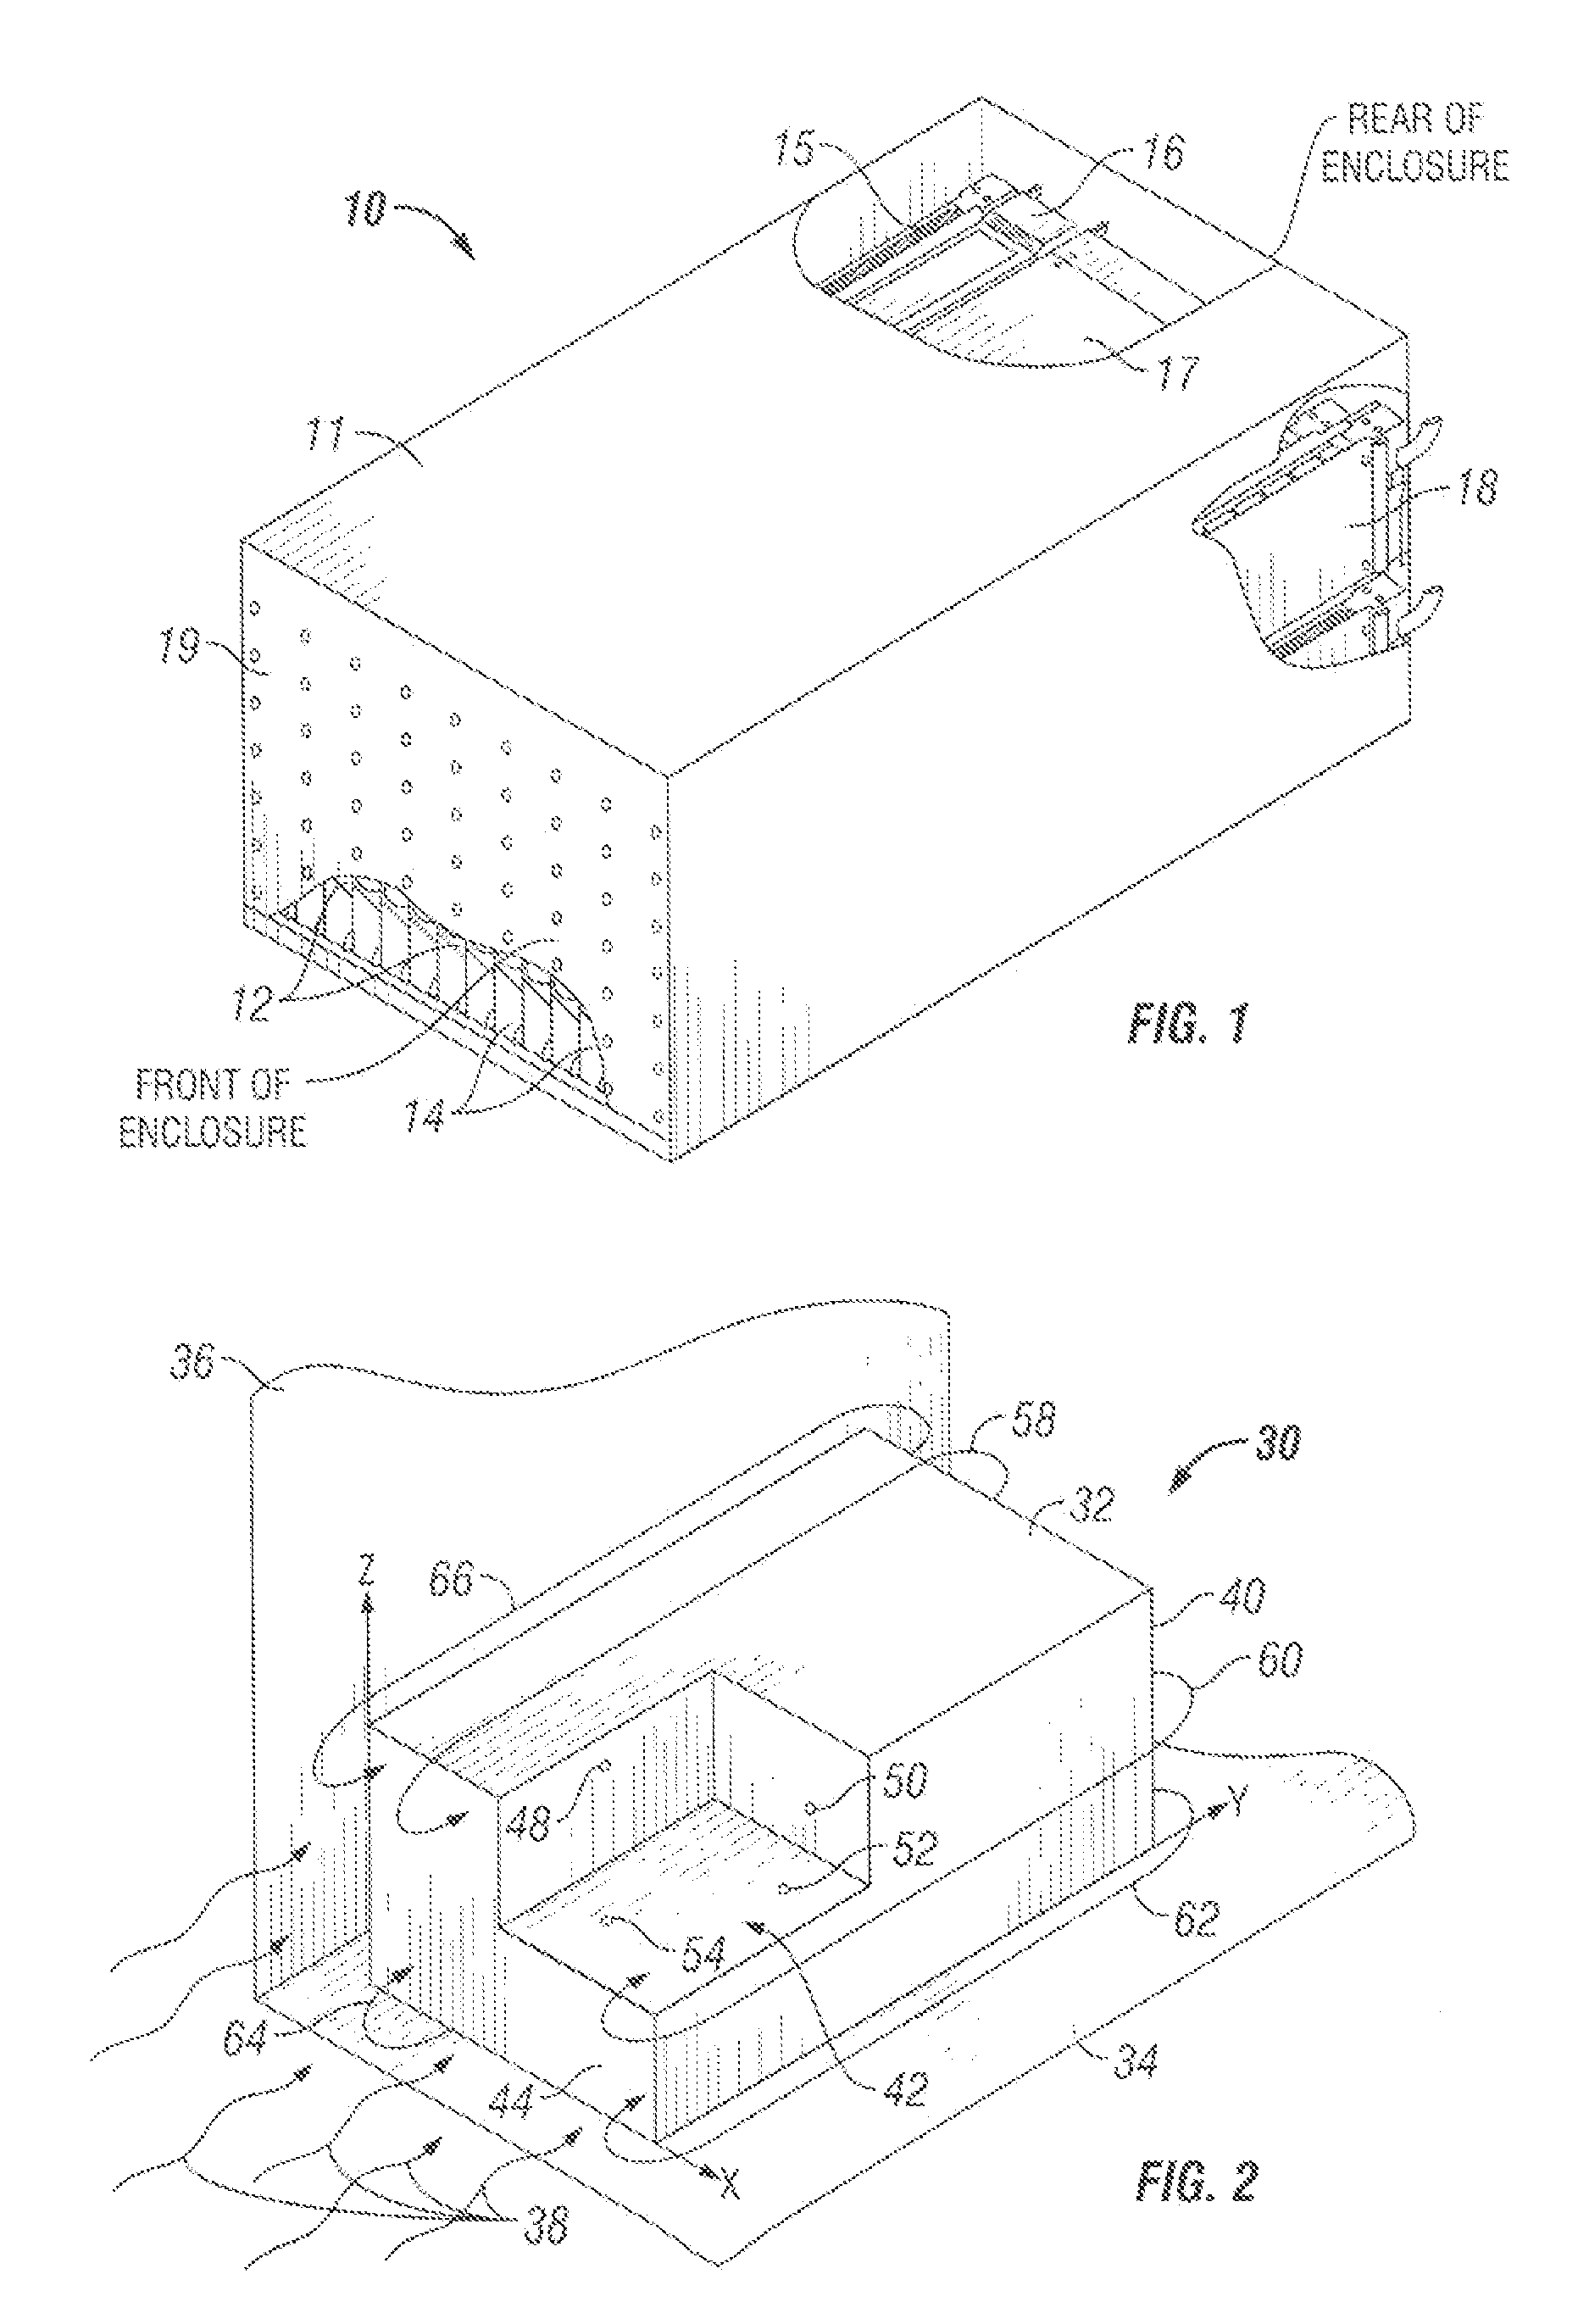 Method of detecting recirculation of heated air within a rack enclosure